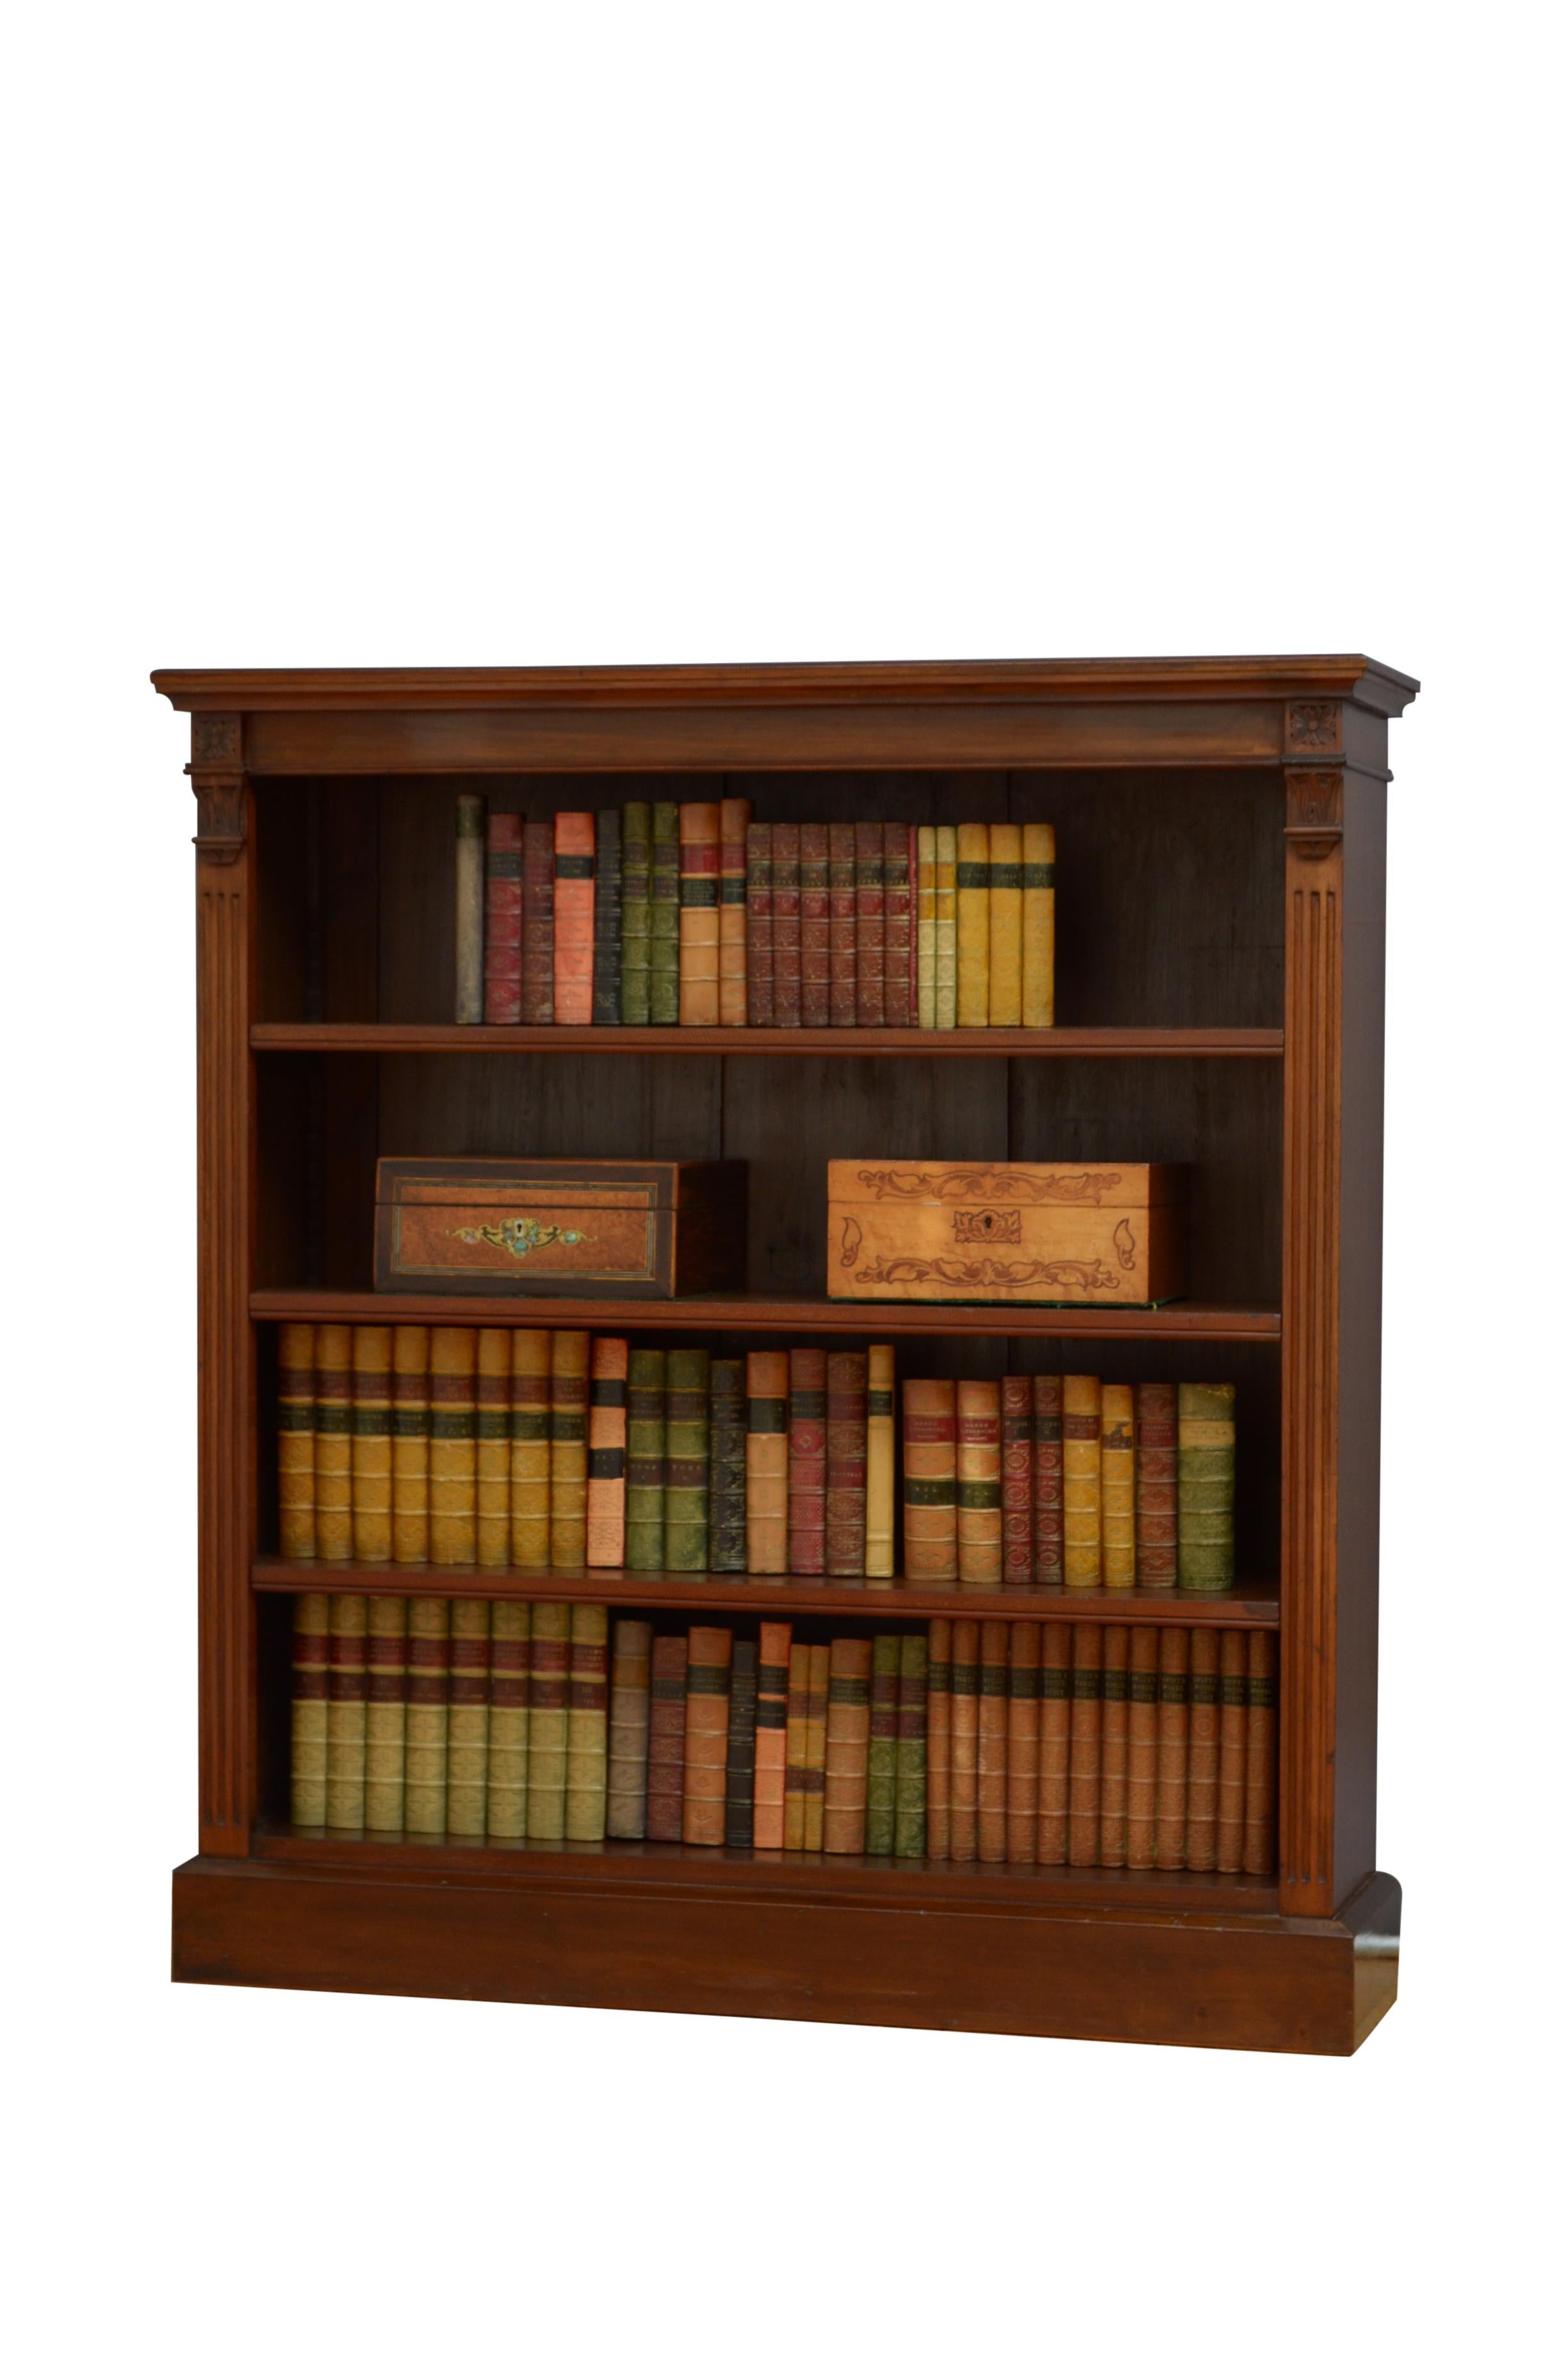 0596 Victorian open bookcase in mahogany, having figured top above shallow frieze and three height adjustable shelves, all flanked by reeded pilasters and drop carvings, standing on plinth base. This antique bookcase retains its original finish